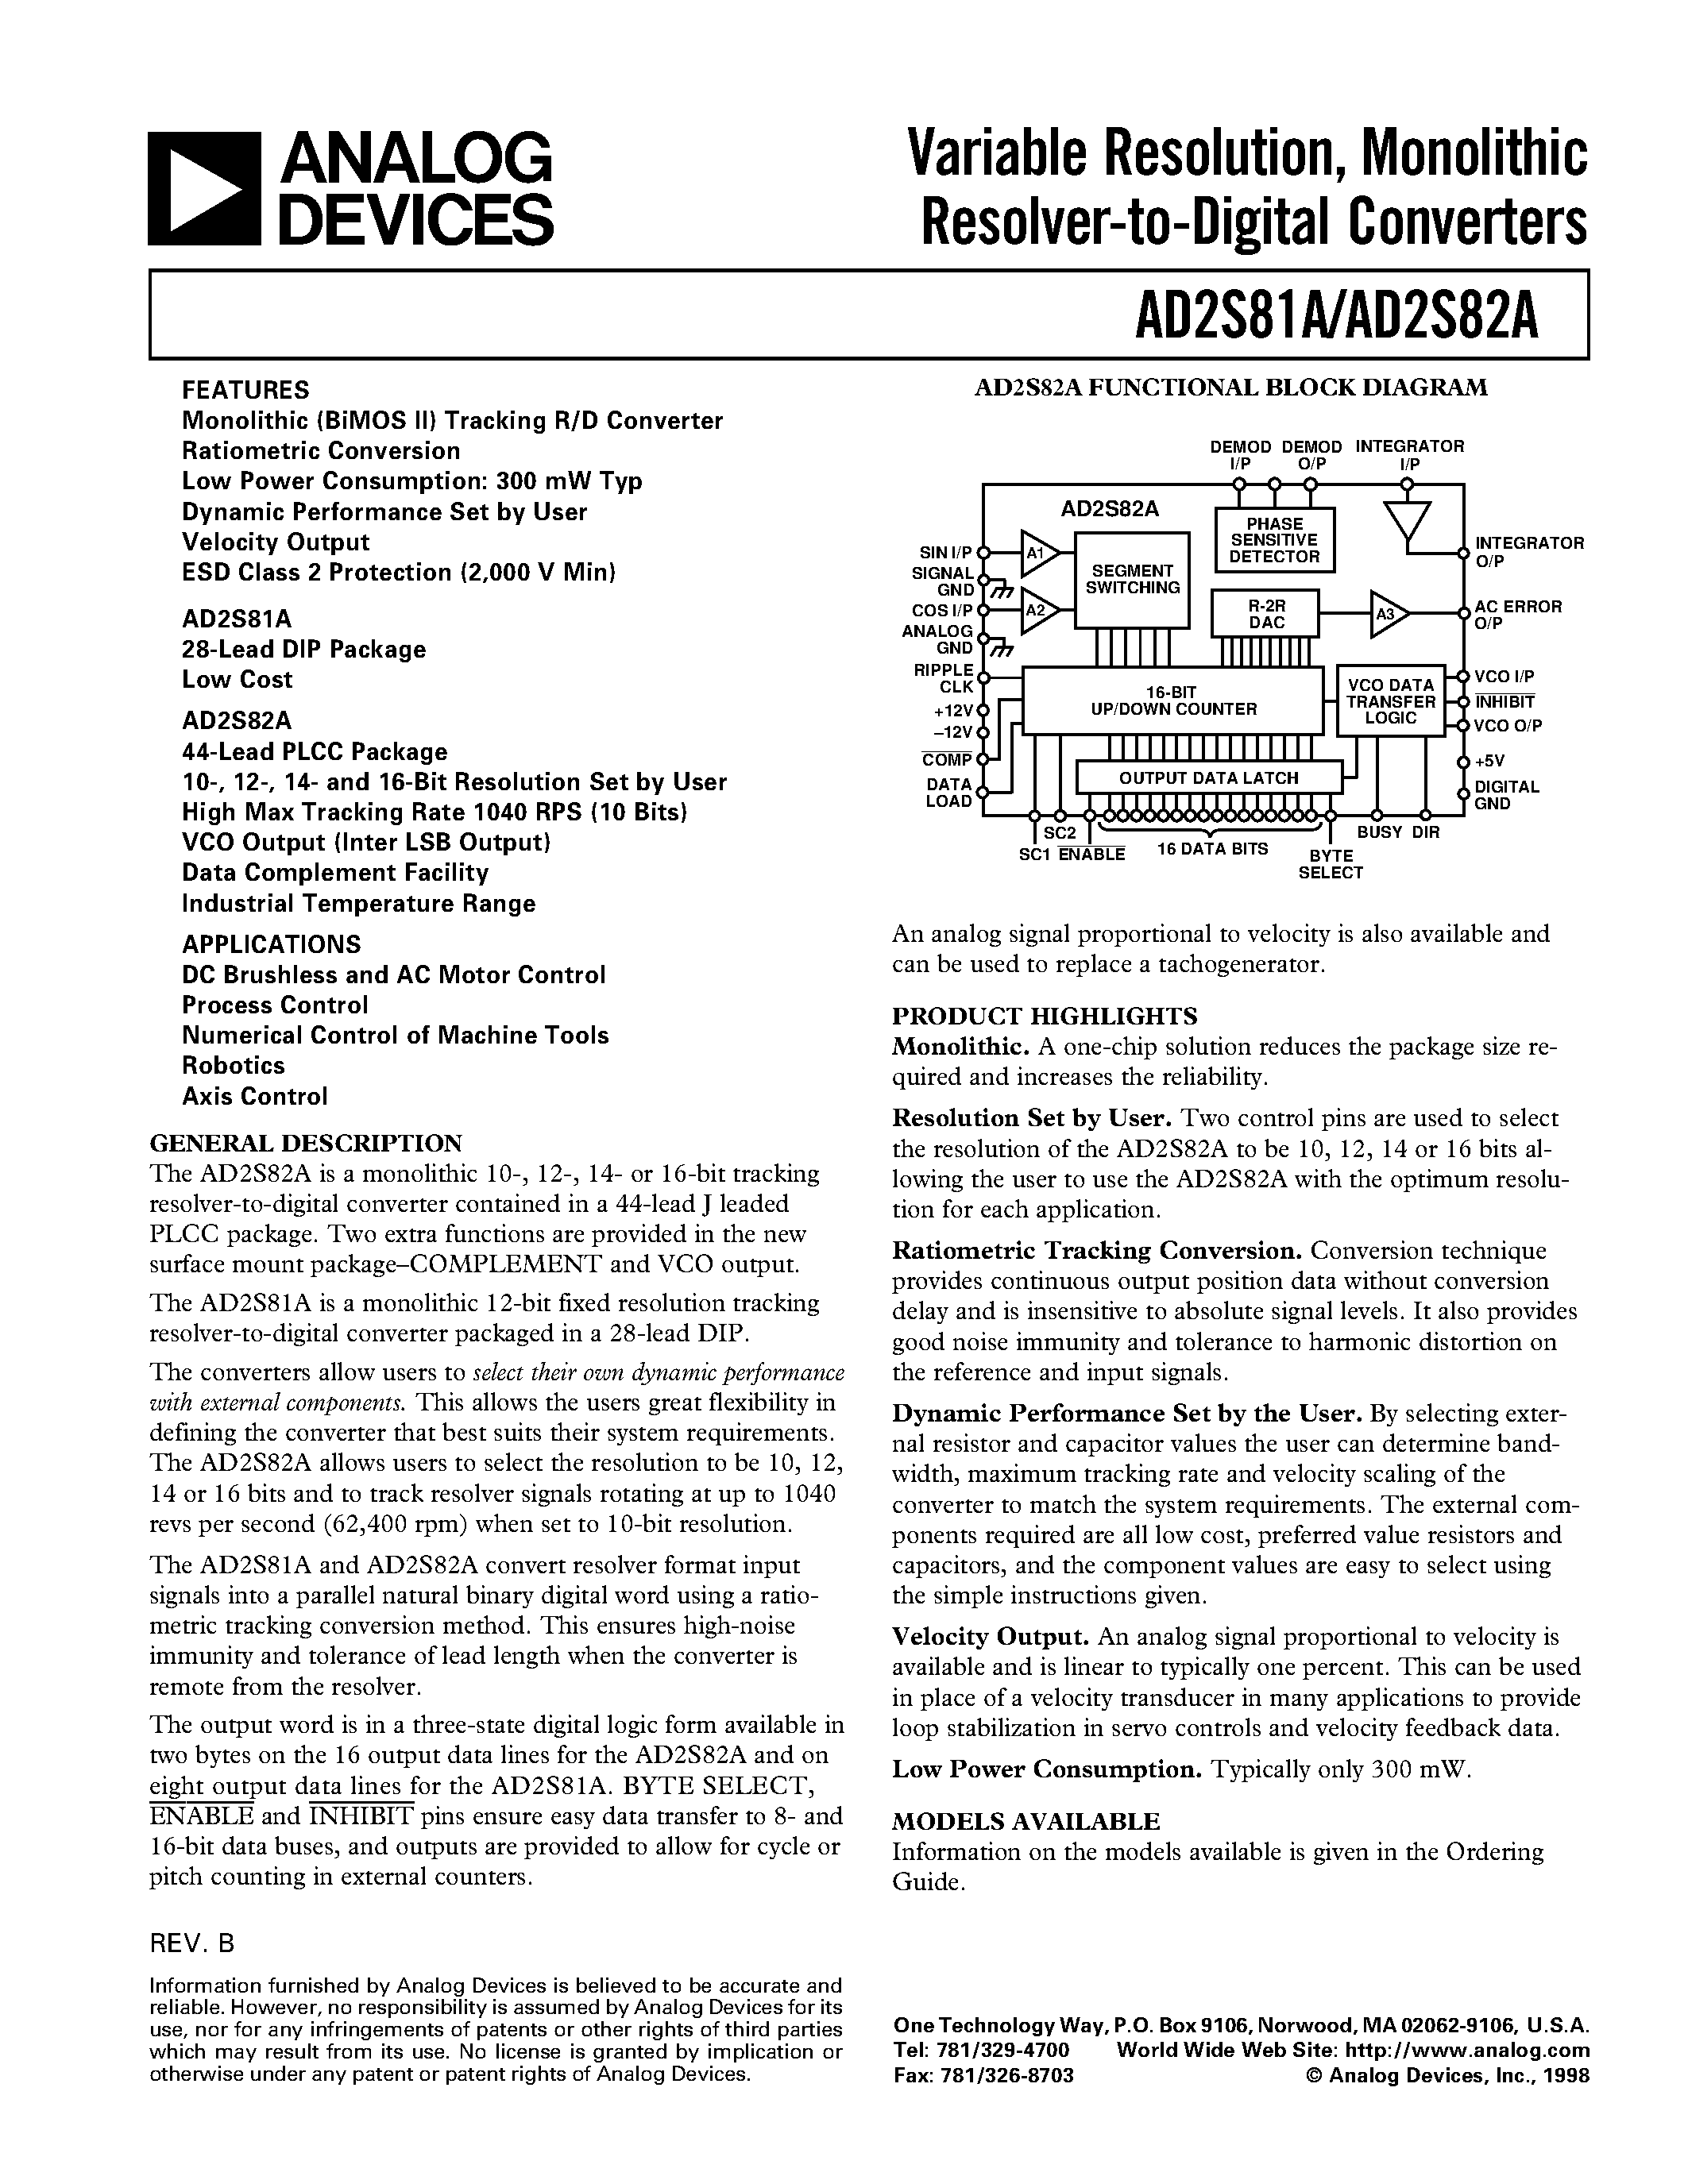 Даташит AD2S82A - Variable Resolution/ Monolithic Resolver-to-Digital Converters страница 1